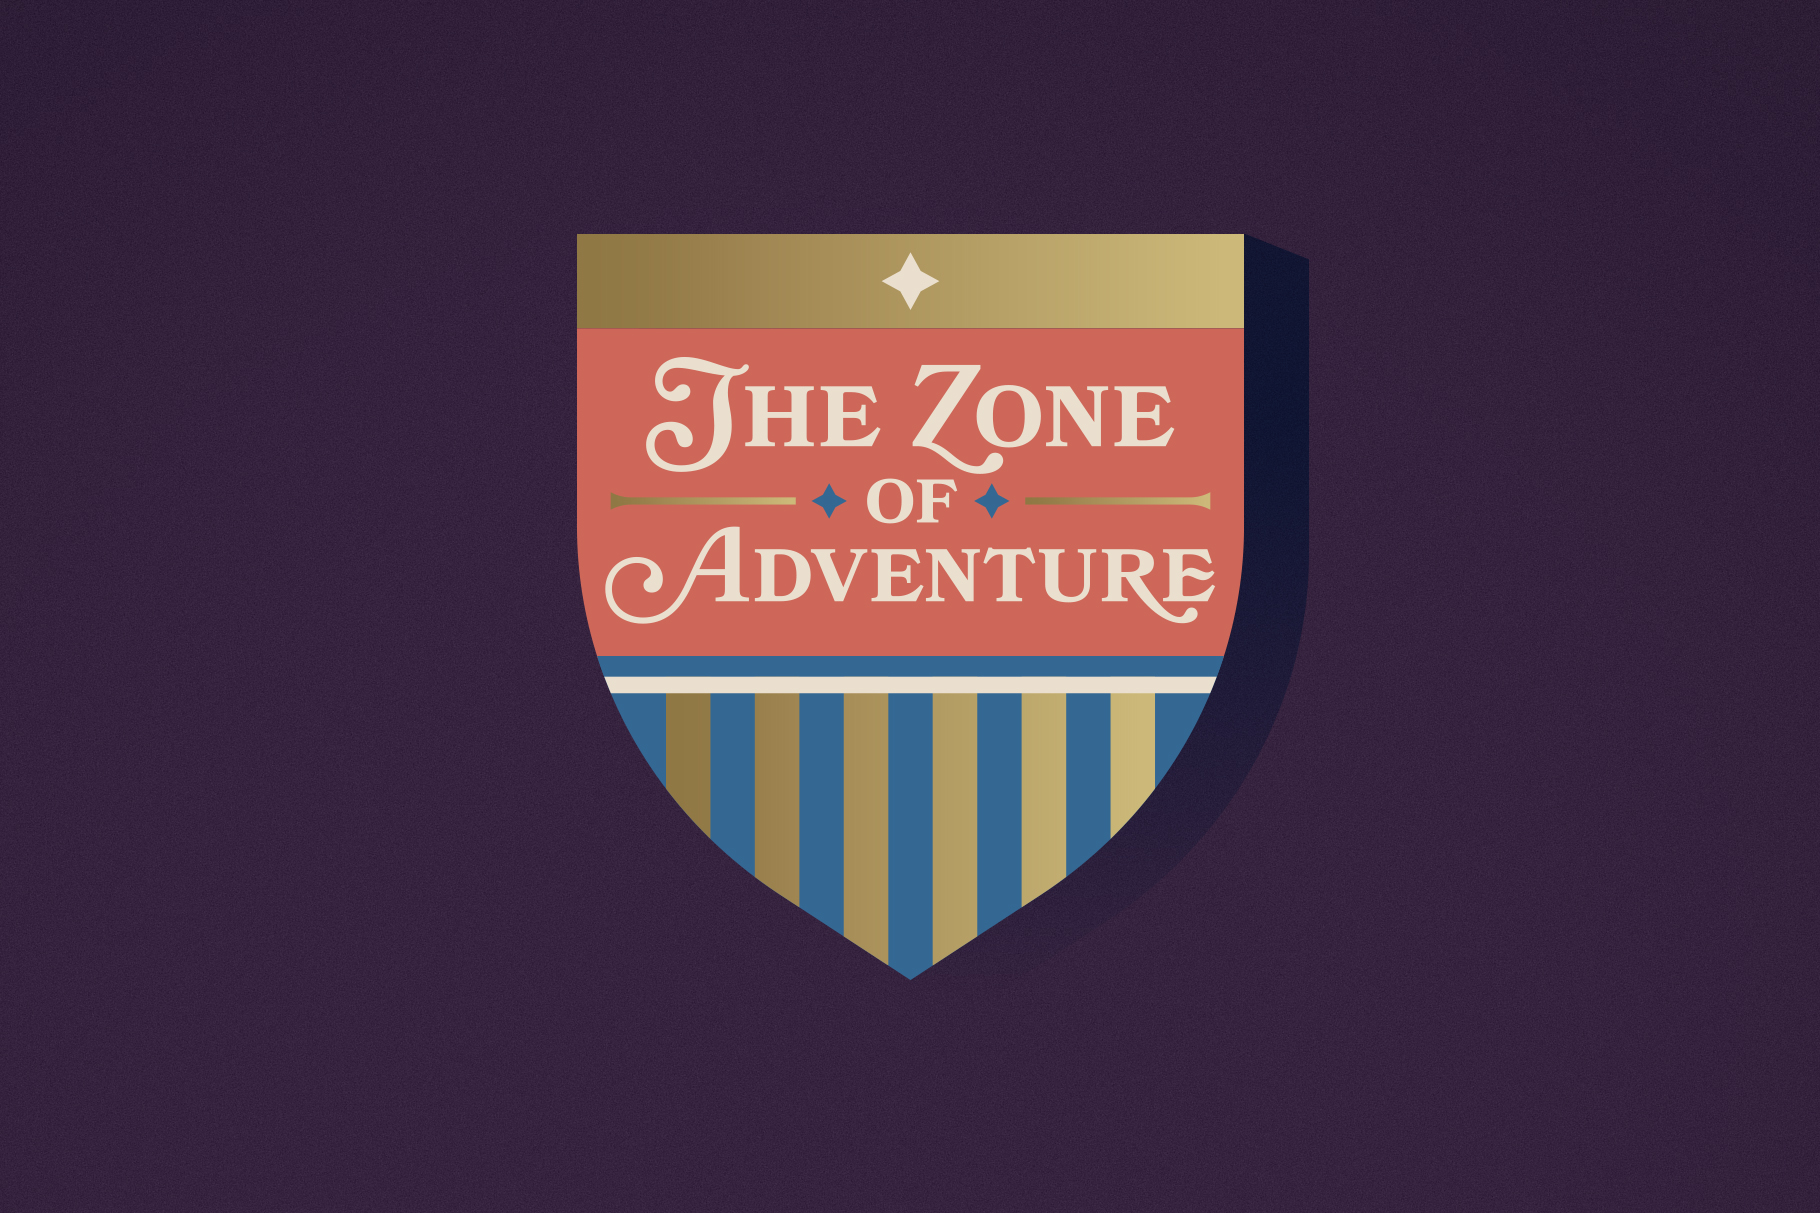 An illustrated shield with blue and gold vertical bars at the bottom and a horizontal gold bar at the top. In the middle is a red field with the text “The Zone of Adventure”. The background of the image is dark purple.